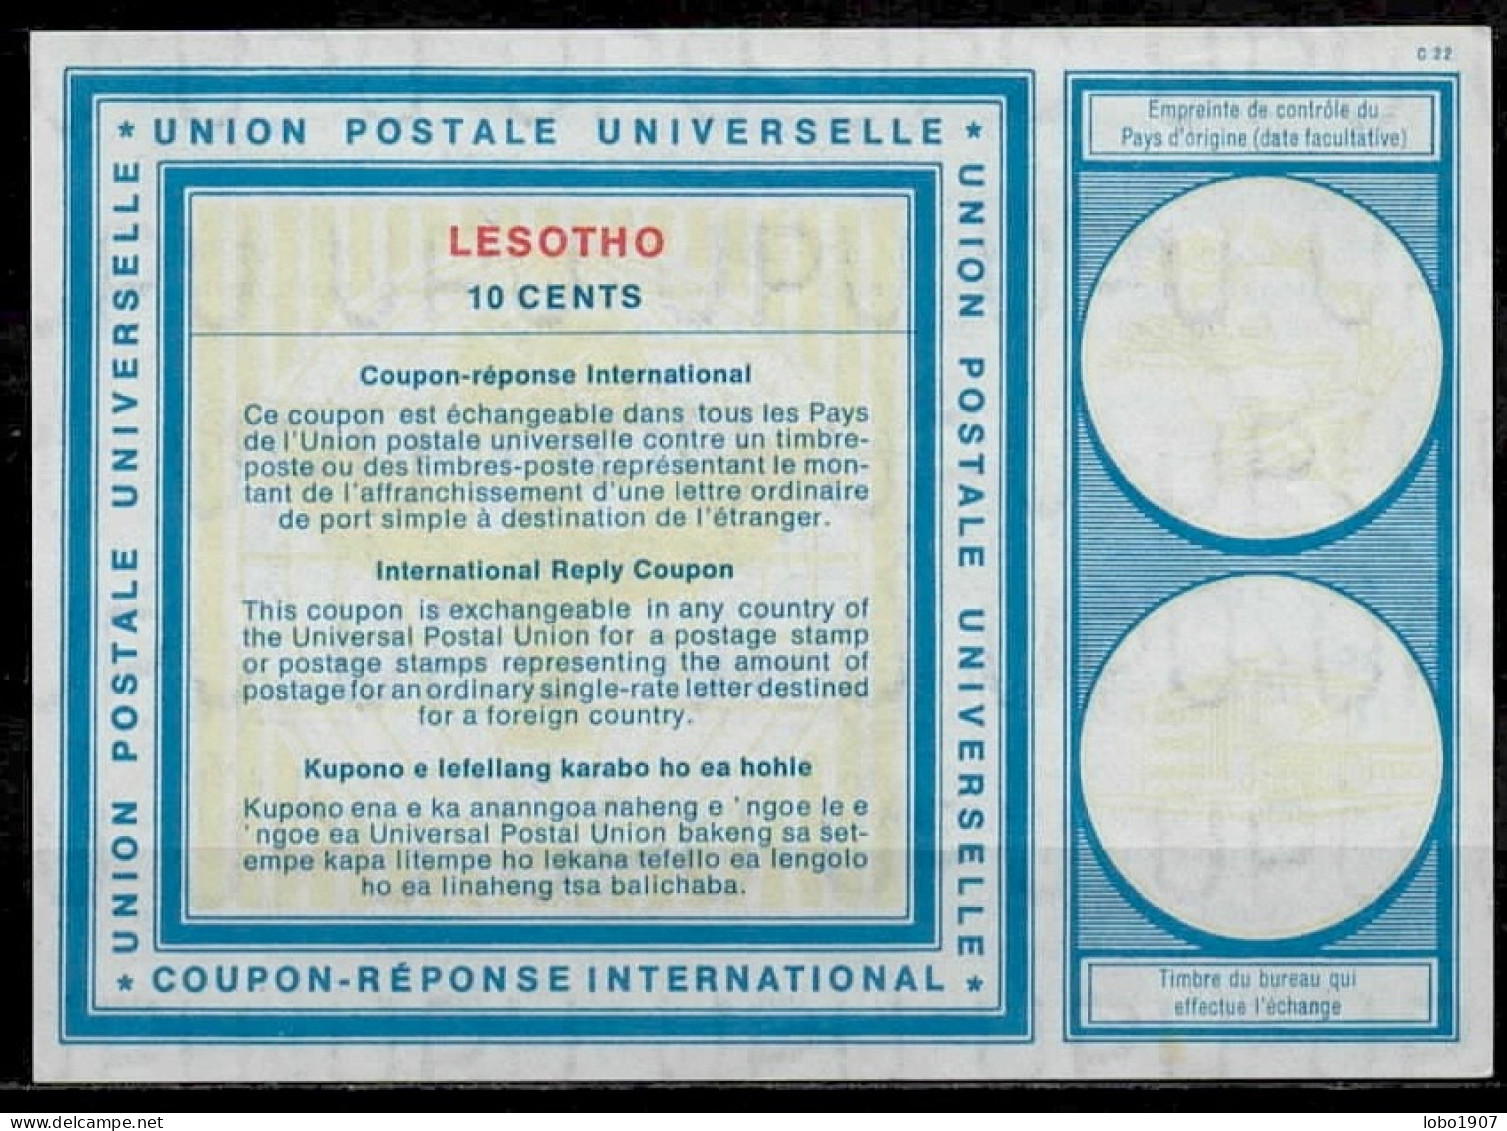 LESOTHO  Vi19  10 CENTS International Reply Coupon Reponse Antwortschein IRC IAS  MINT ** - Lesotho (1966-...)